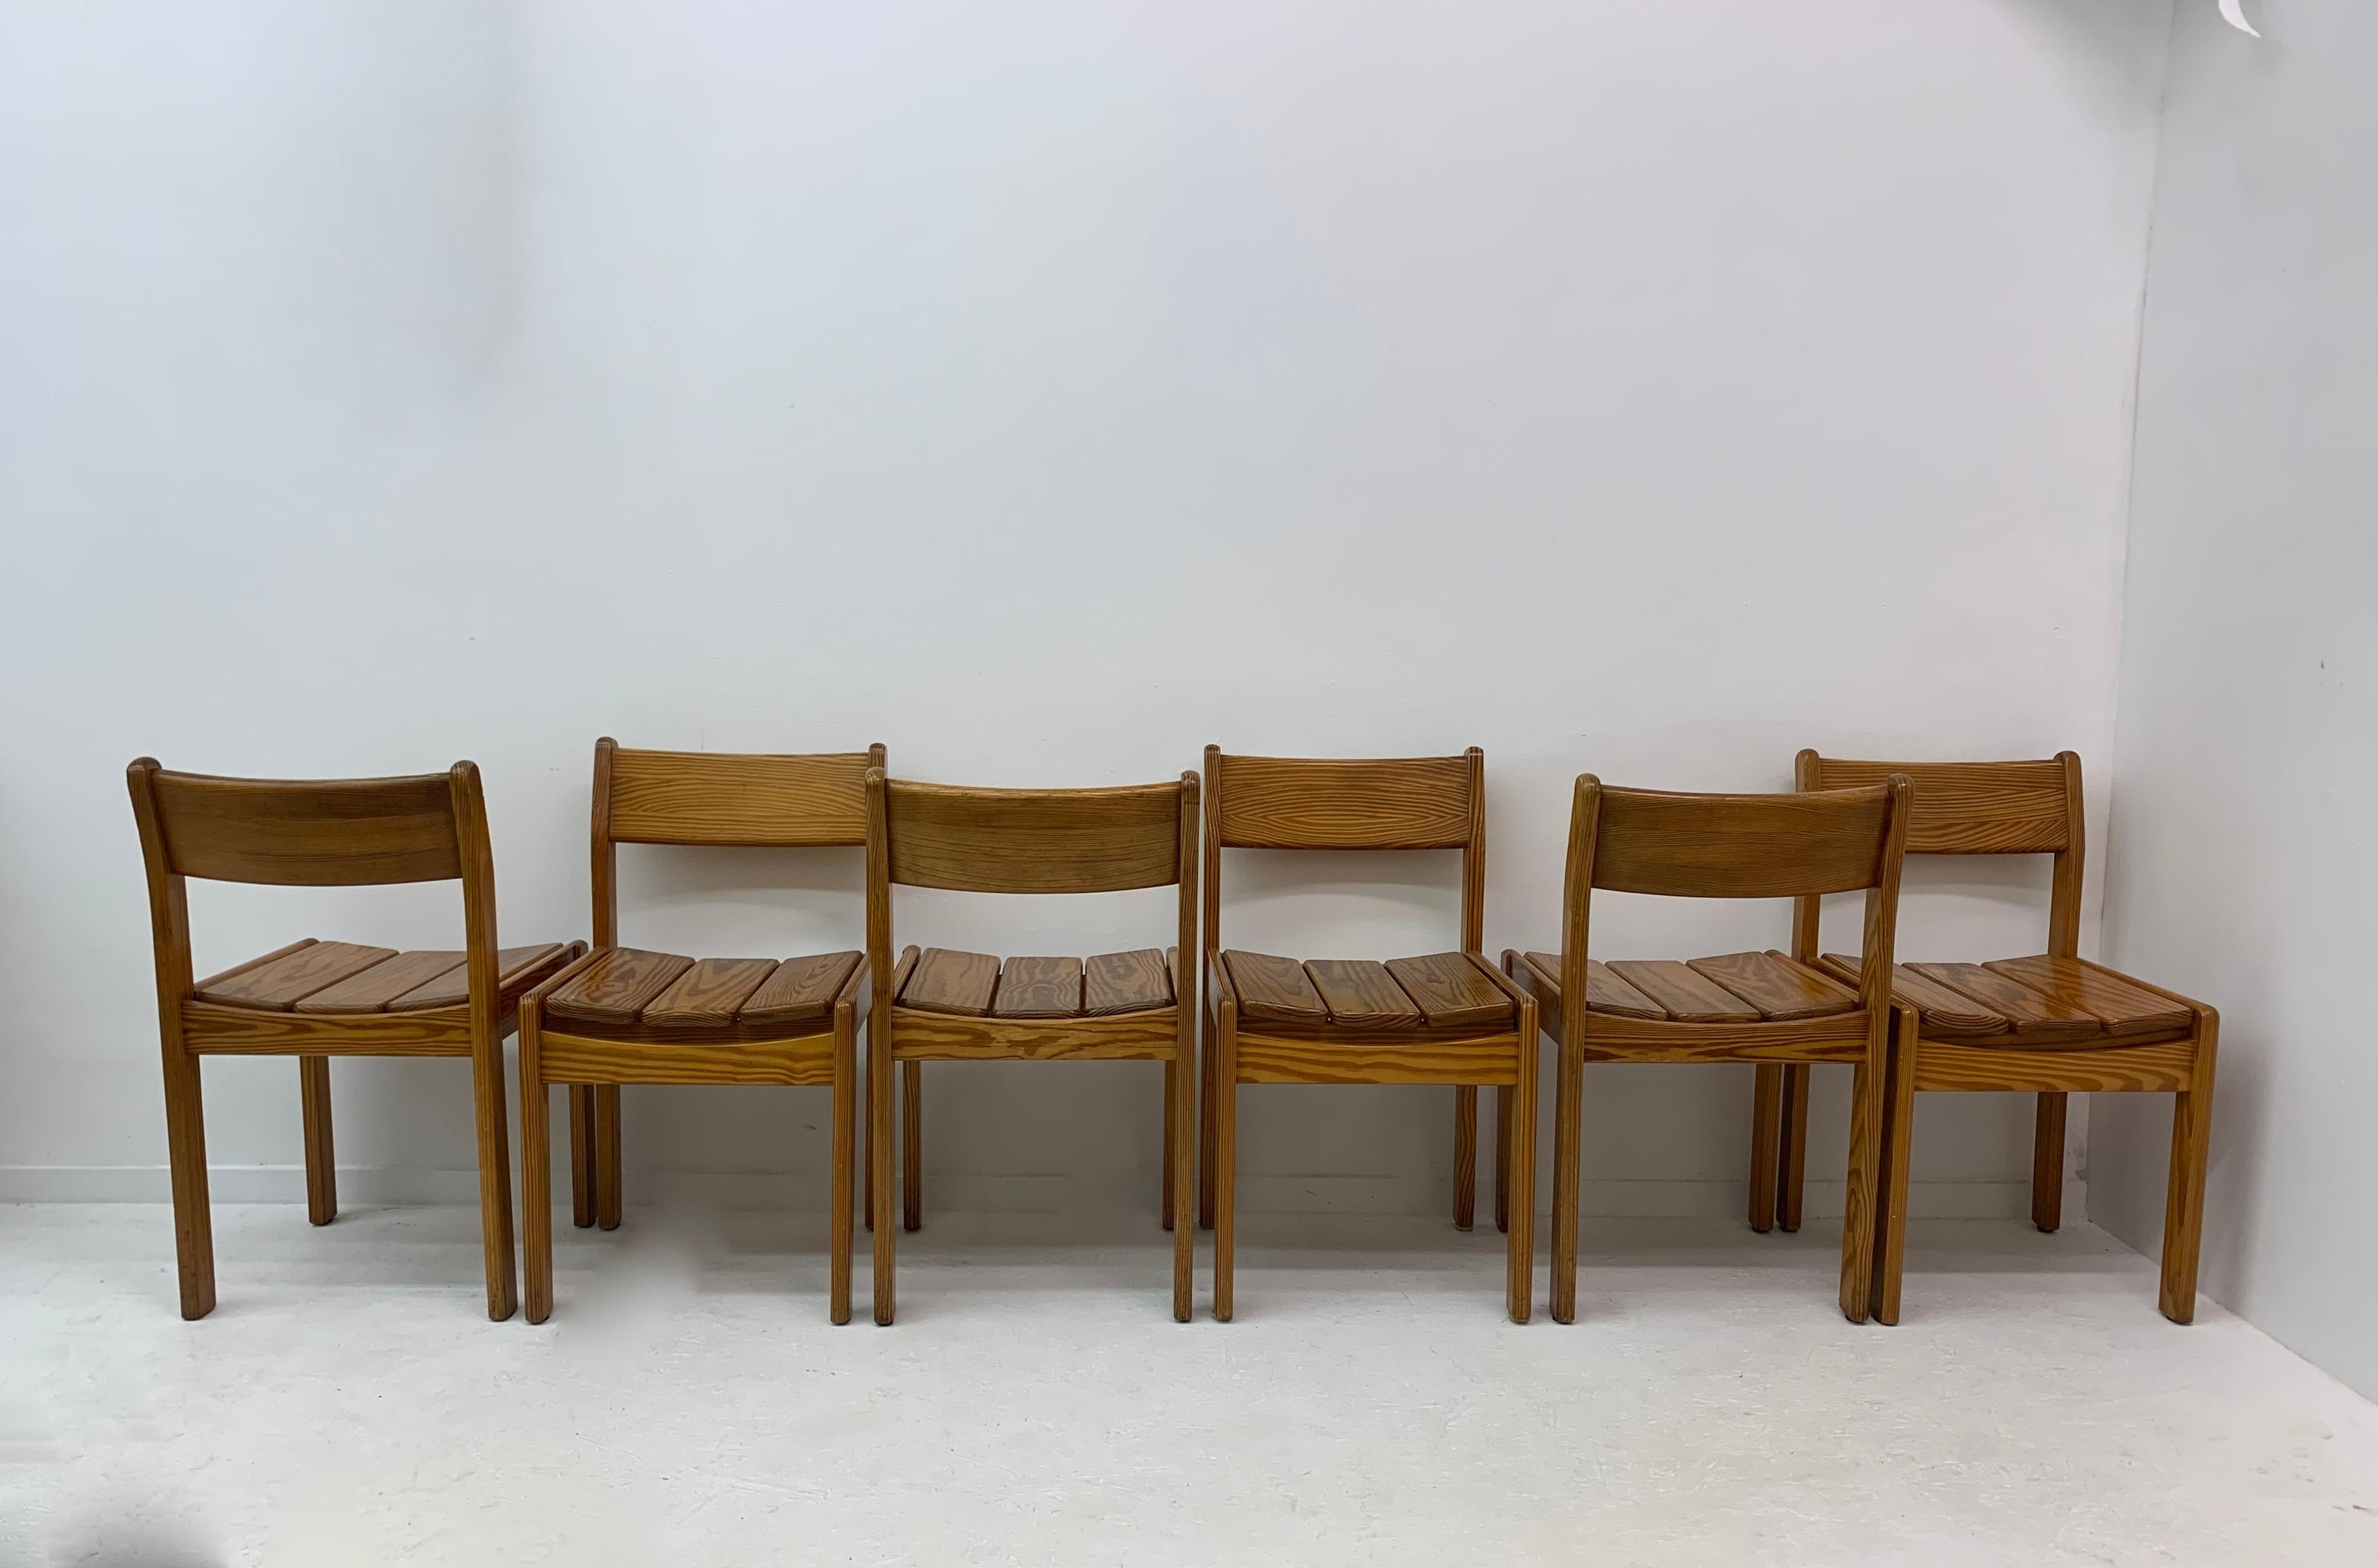 Set of 6 Pine Wood Dining Chairs, 1970’s For Sale 11